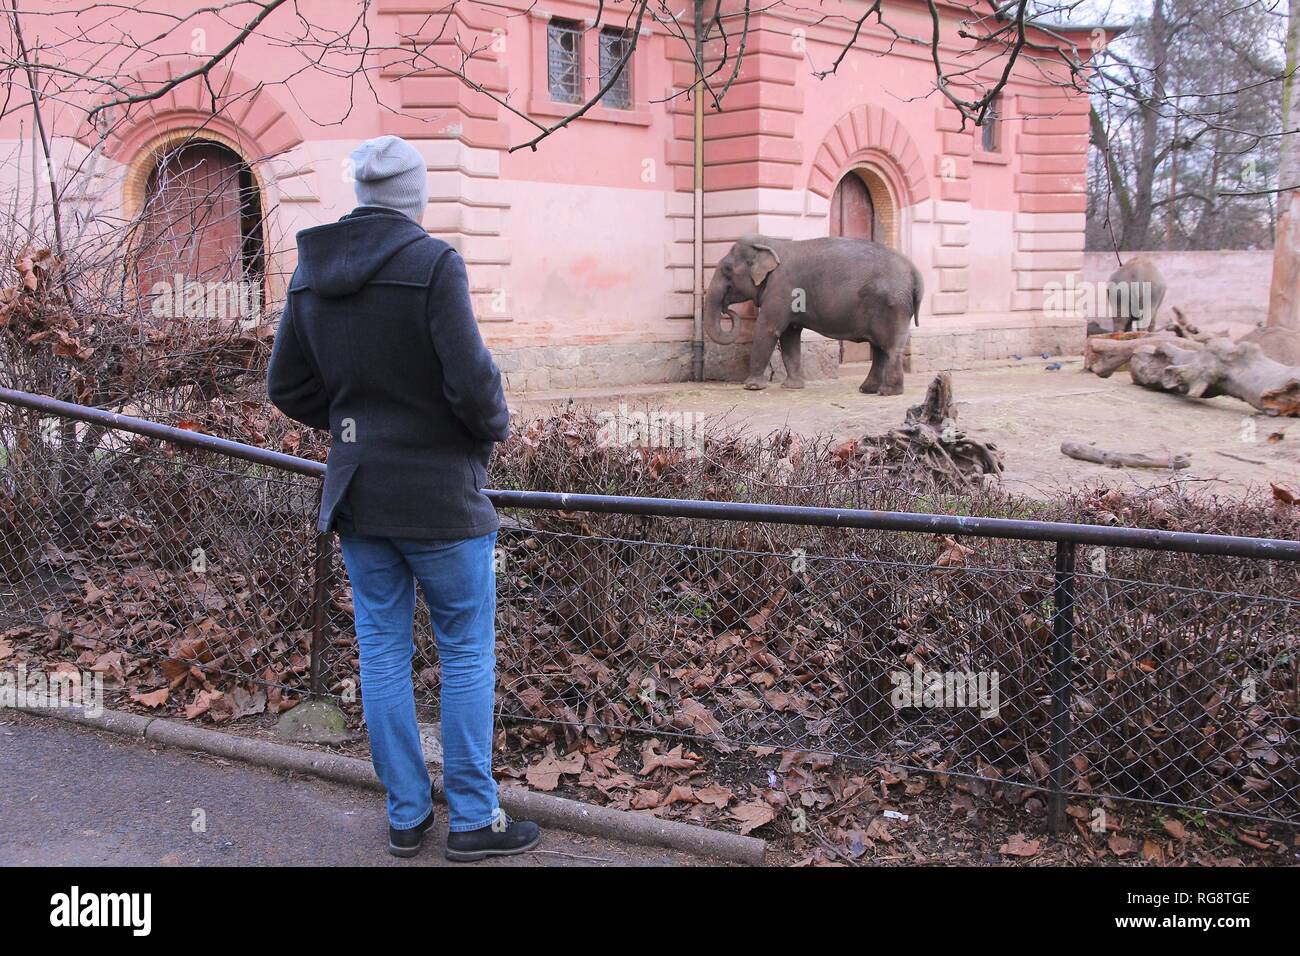 WROCLAW, POLAND - JANUARY 31, 2015: Person visits Wroclaw Zoo. Wroclaw Zoological Garden has 7,100 animals of more than 850 species. Stock Photo